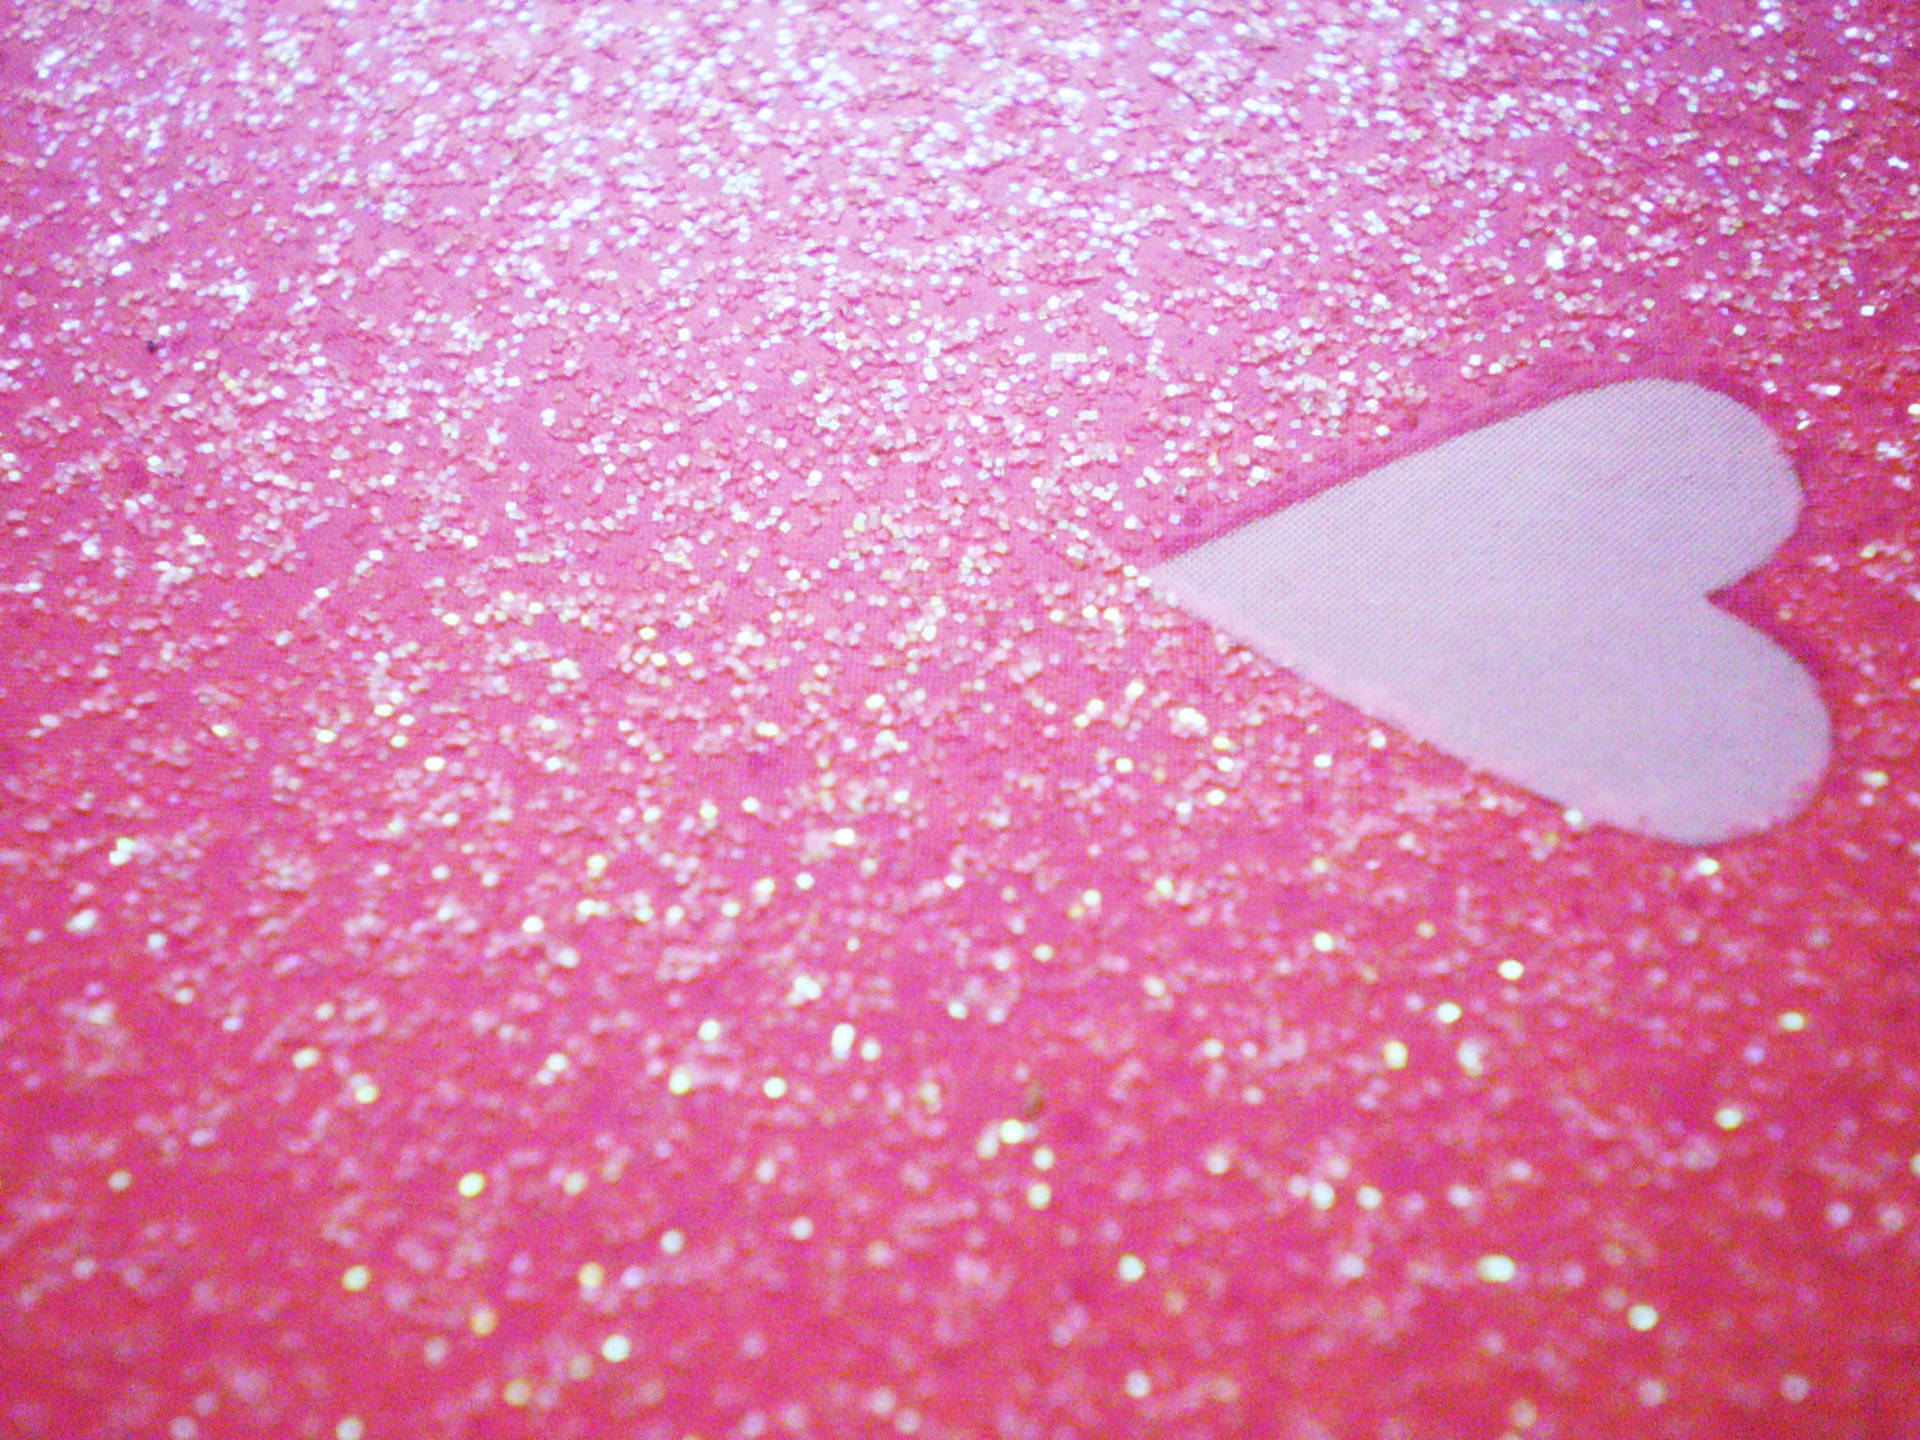 Heart In Pink Sparkles Background